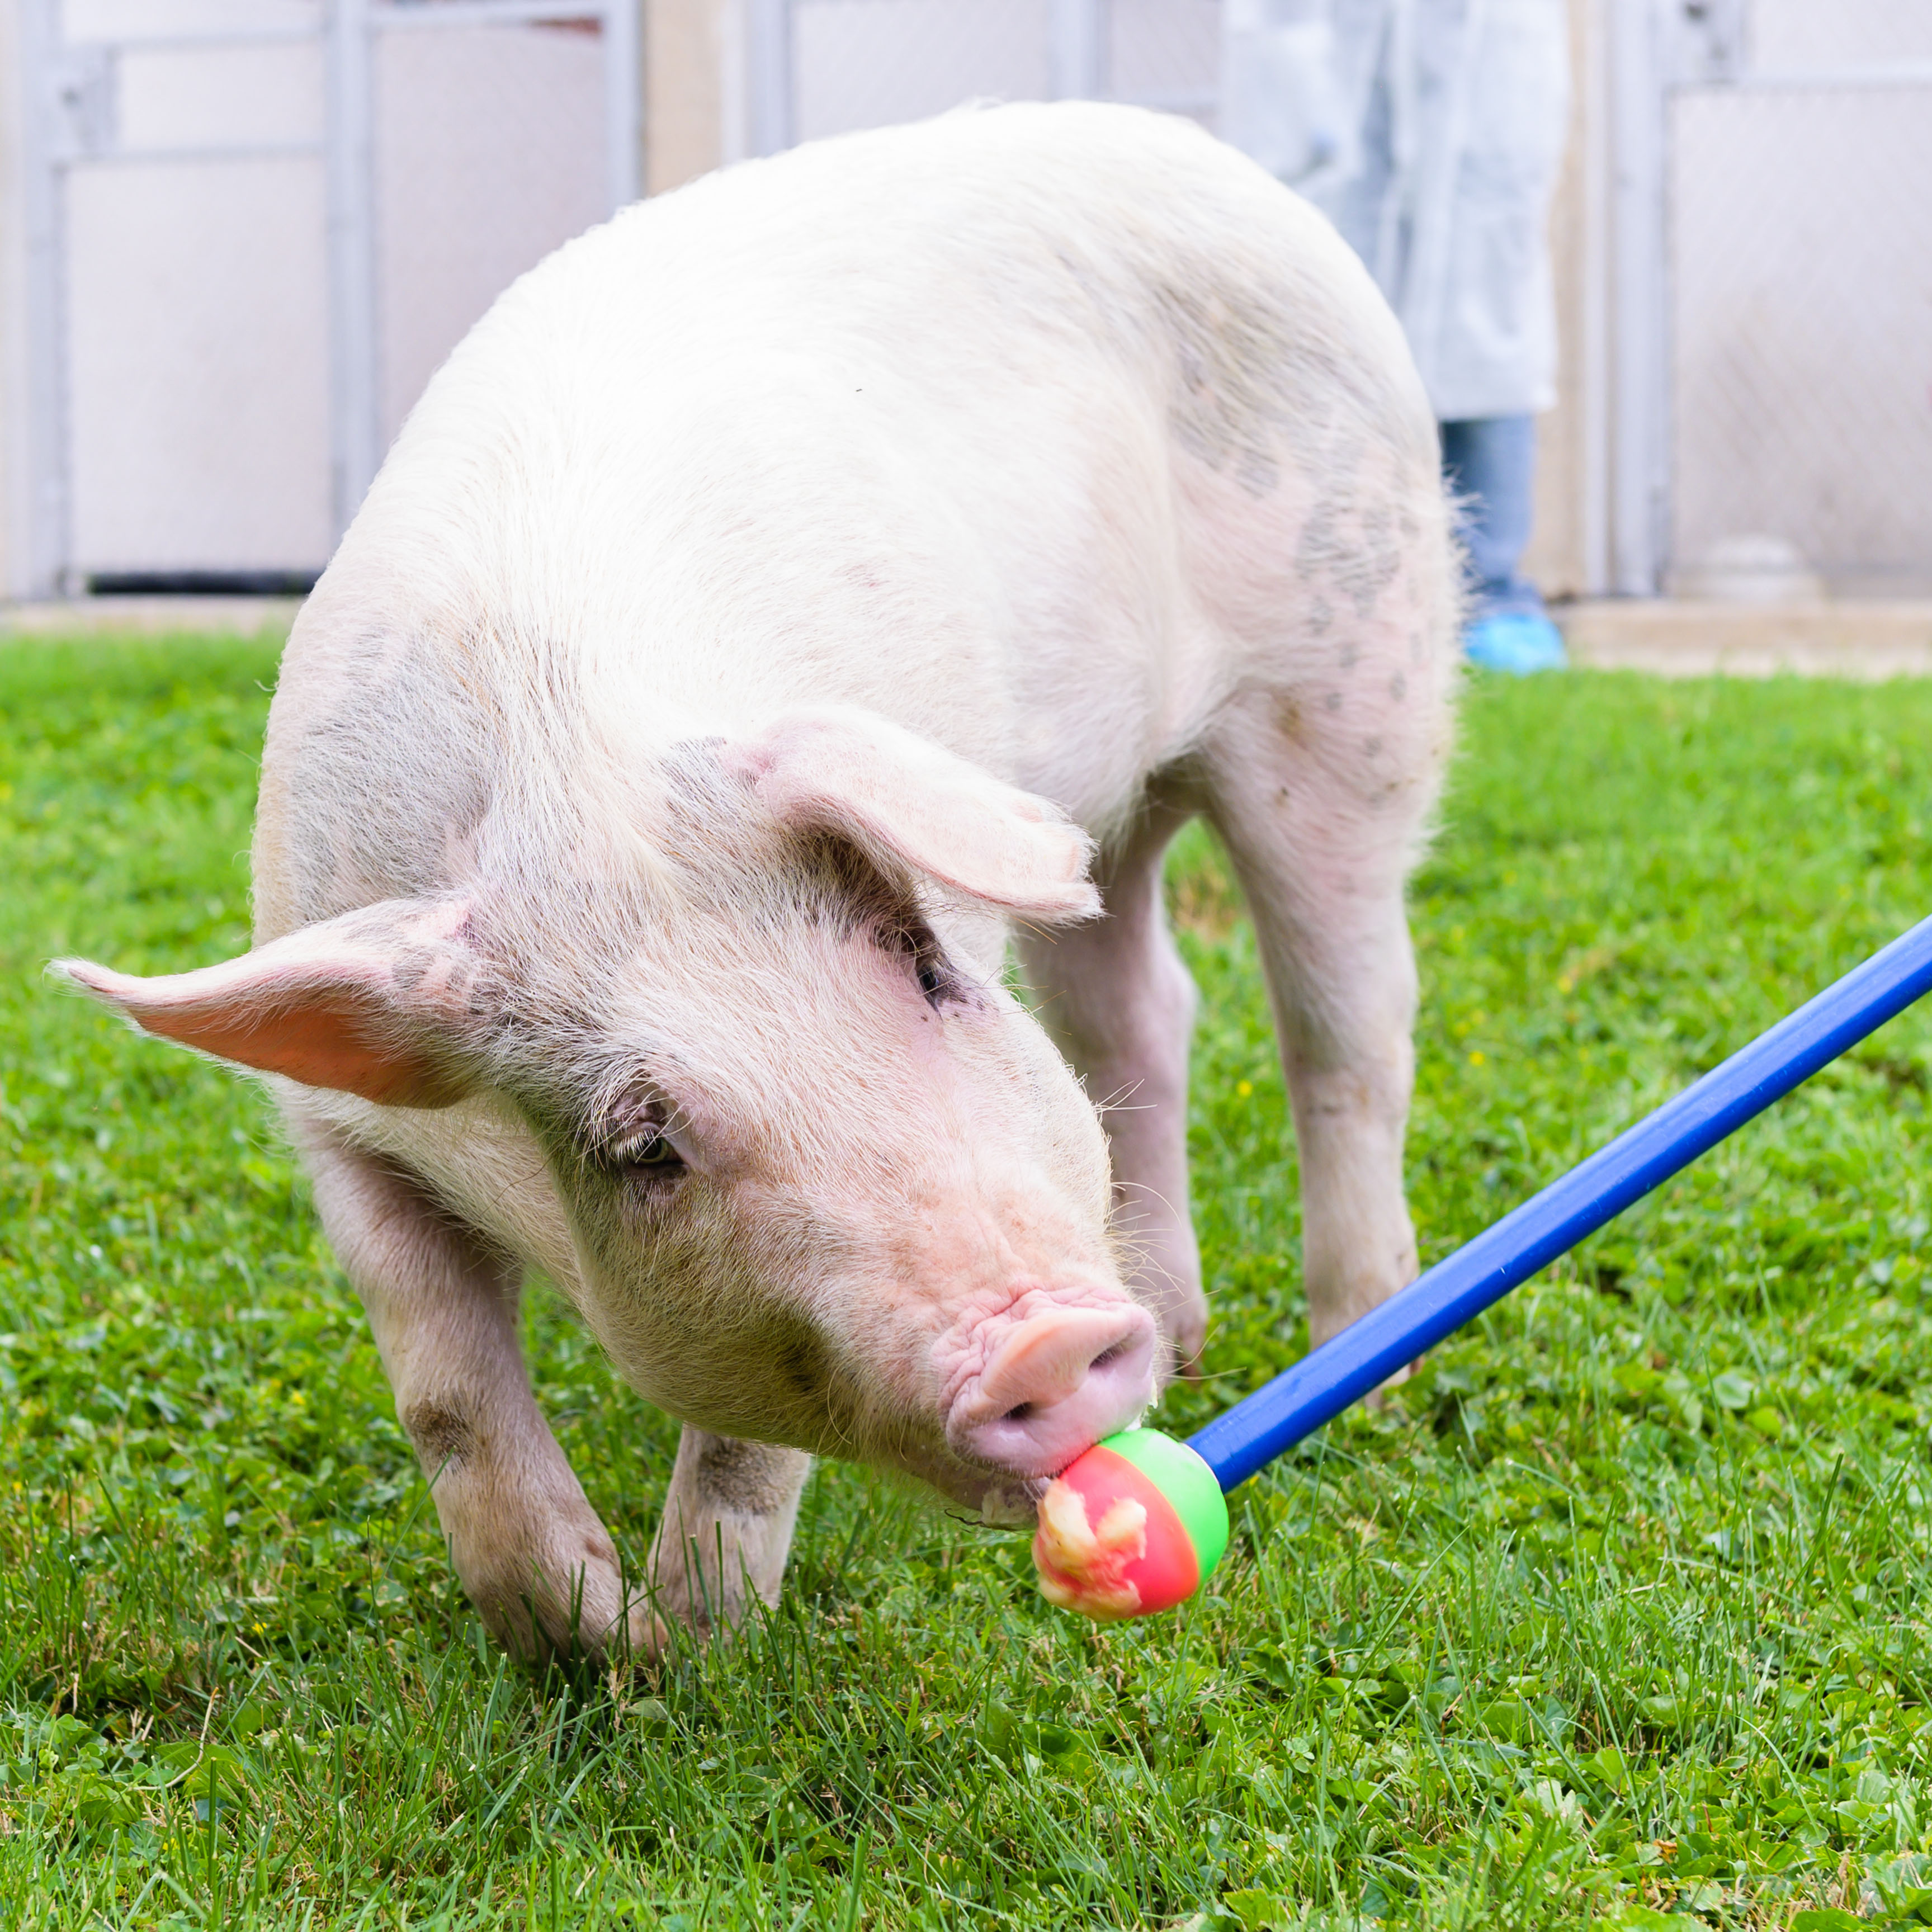 Pig with enrichment ball image